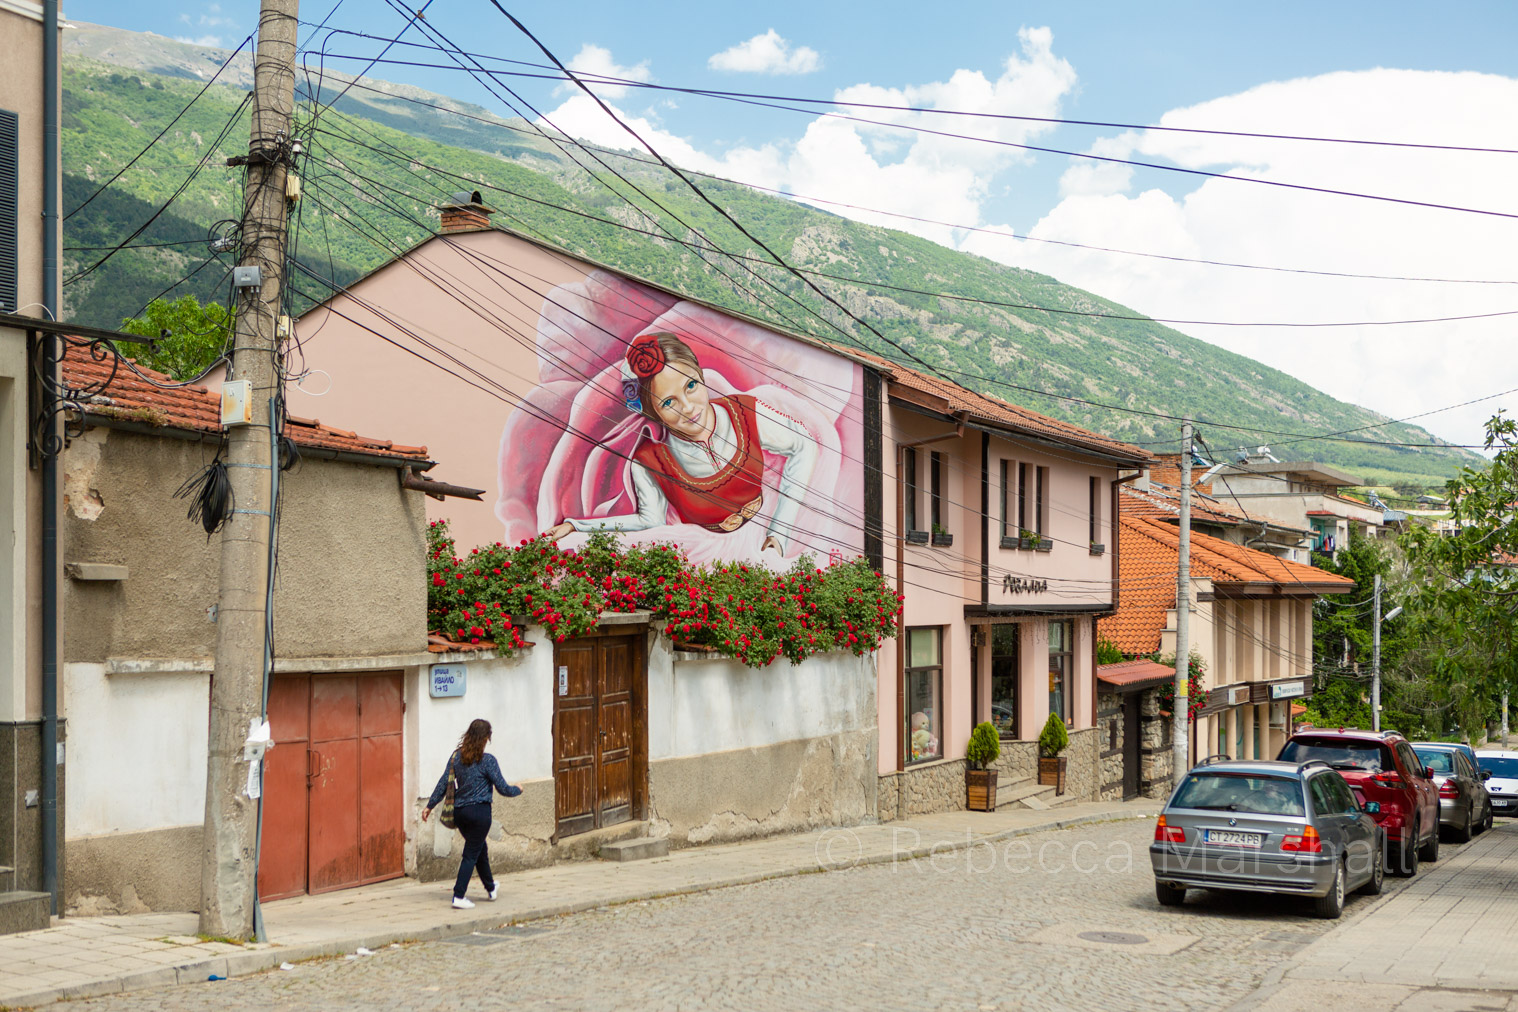 Photograph of a street in the mountains with a mural of a girl and a giant rose bloom on the wall of a house